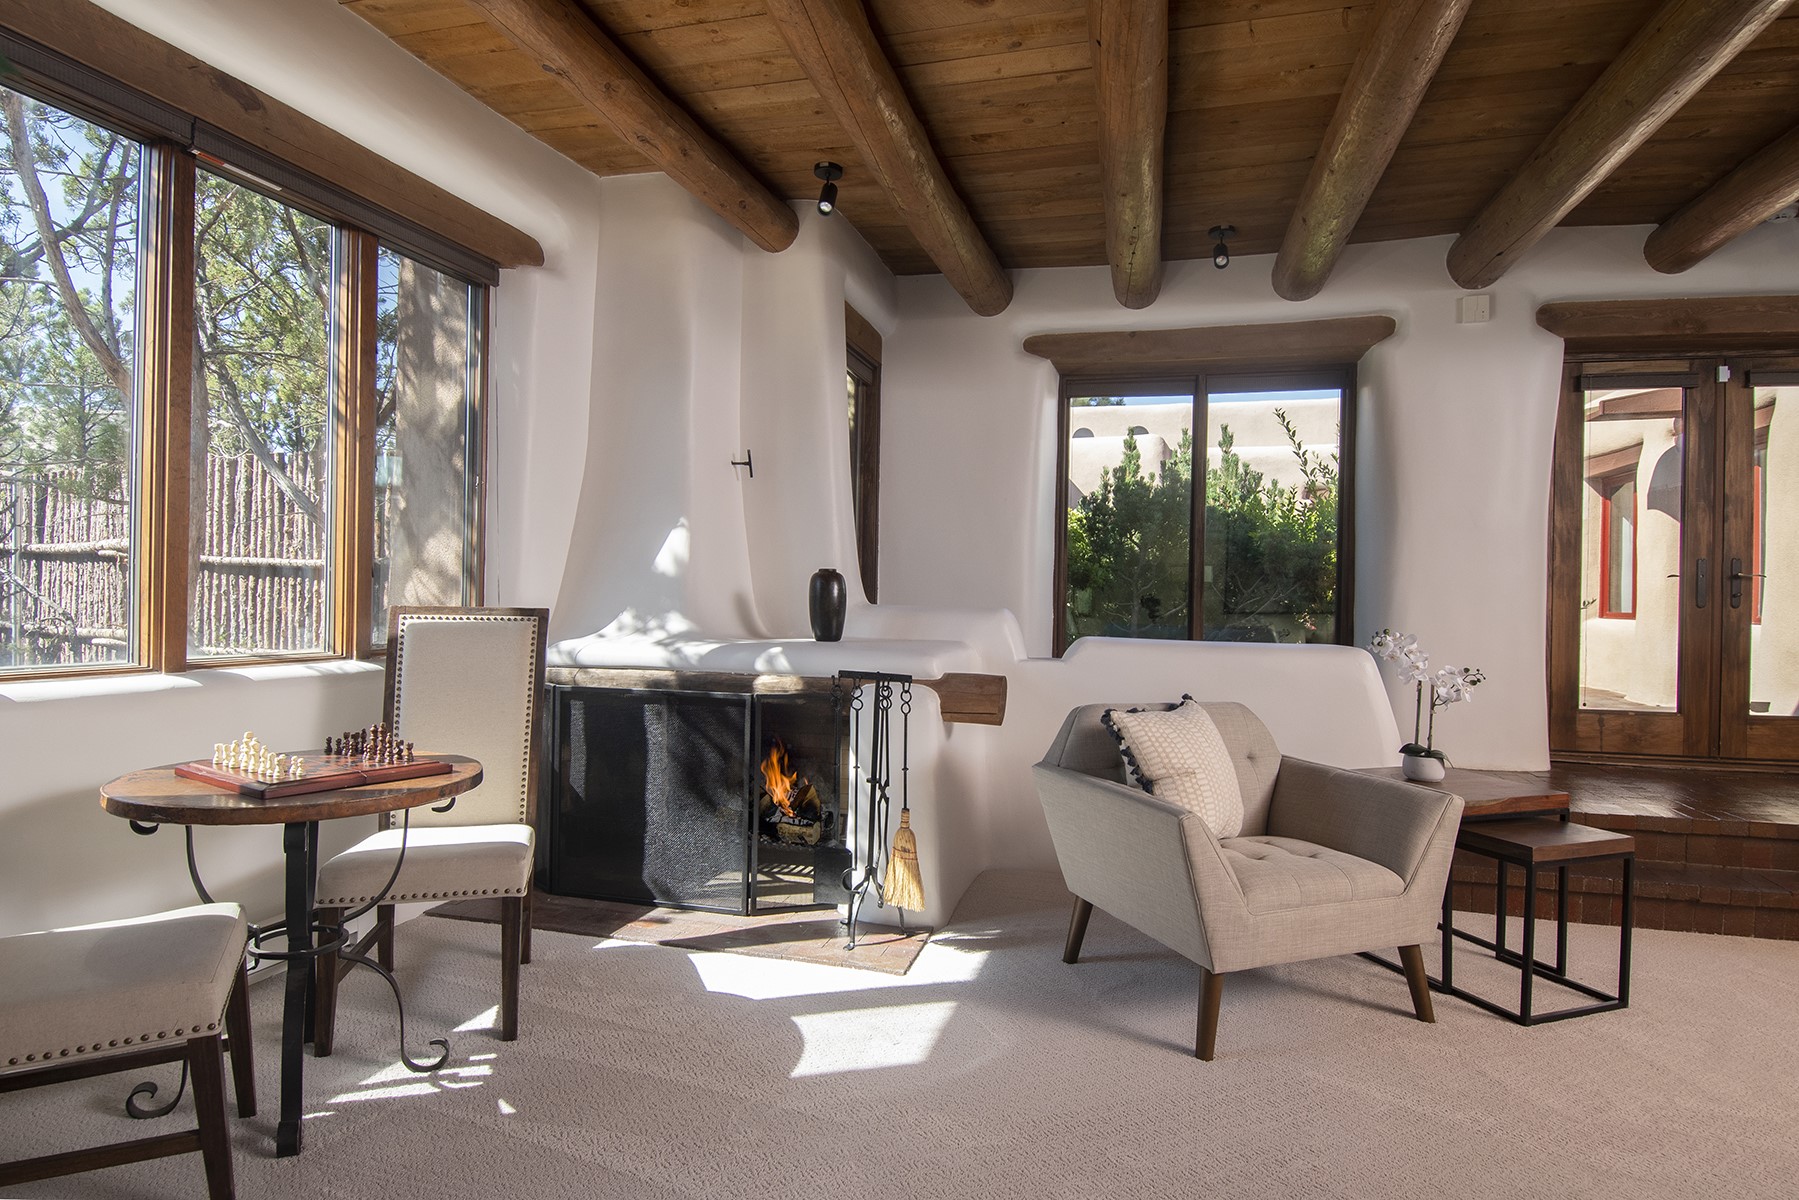 Shepherd's fireplace in 4th bedroom/family room/ guest room. With direct access to center courtyard.